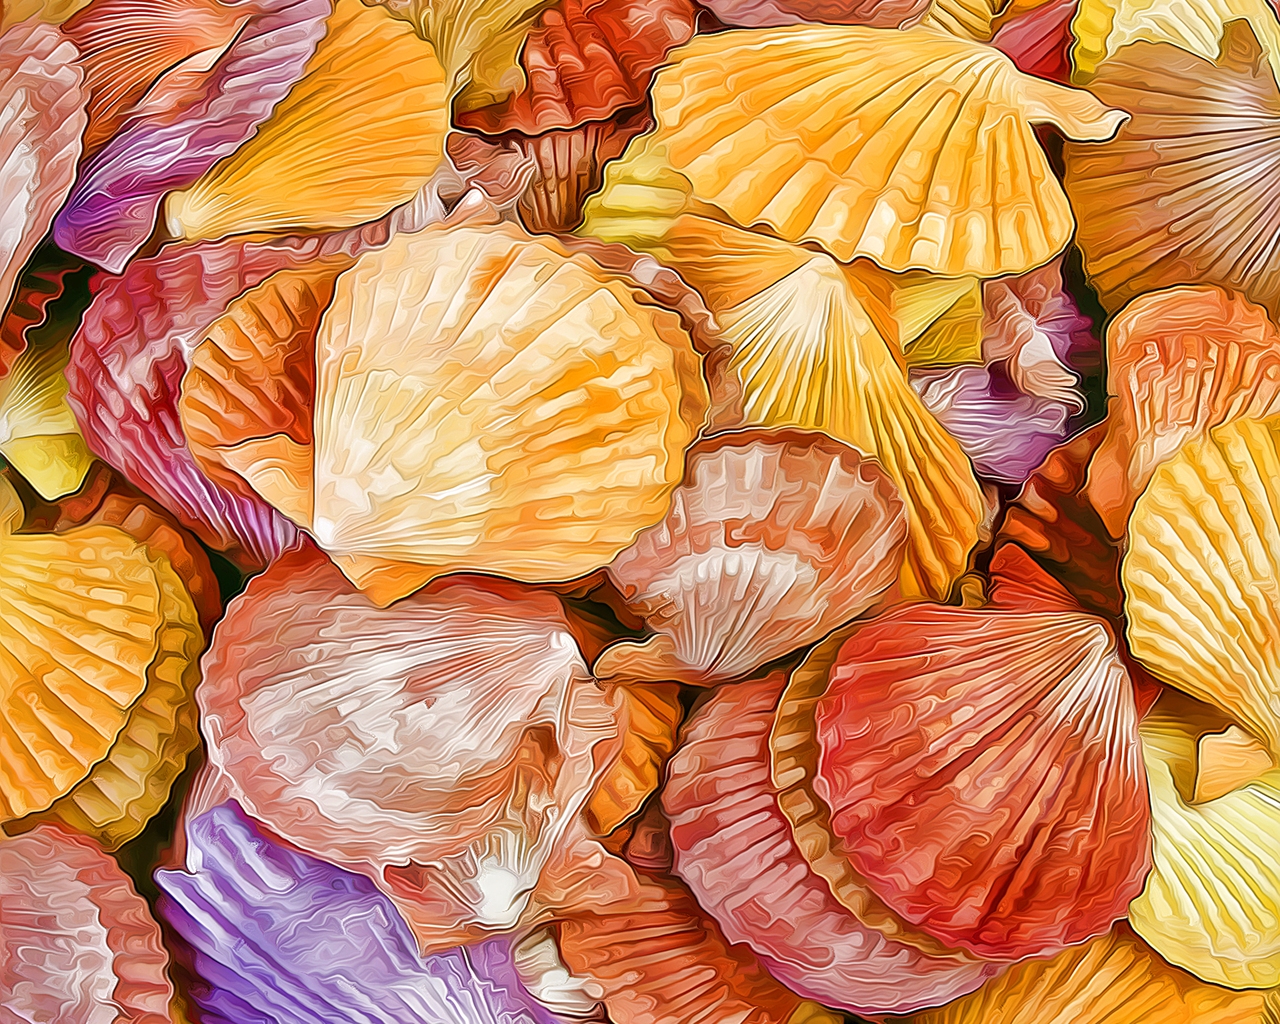 Shells Texture for 1280 x 1024 resolution